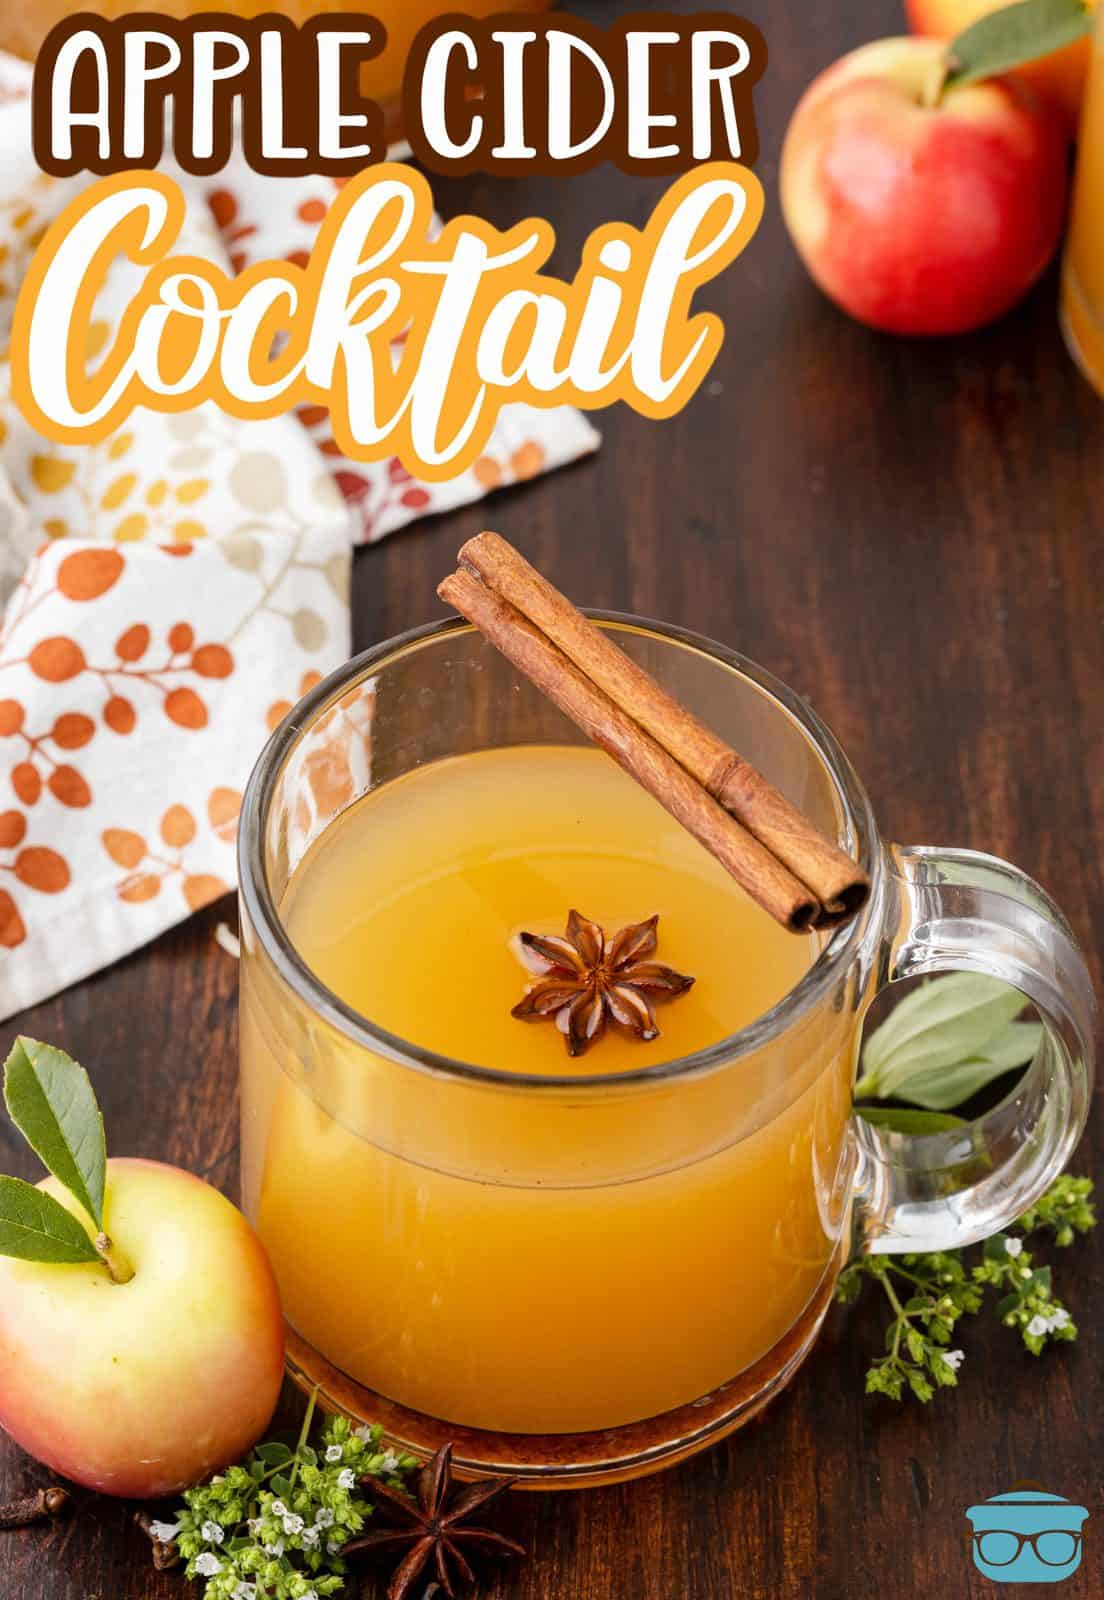 Pinterest image of Warm Apple Cider Cocktail Recipe in handled glass with cinnamon stick and star anise.